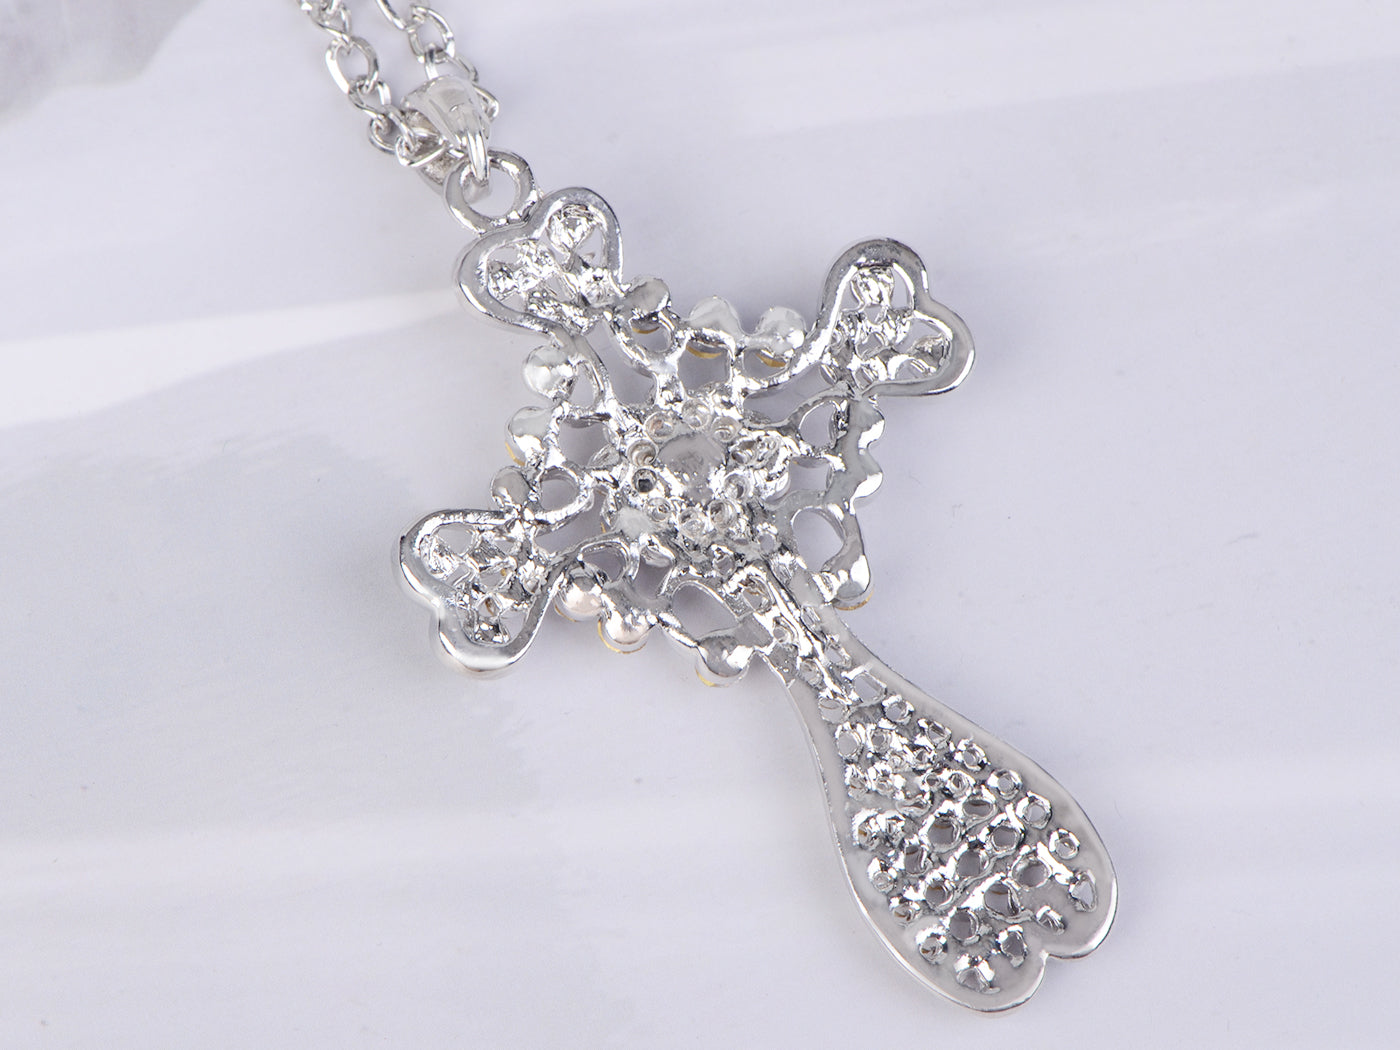 Beaded Heart Flower Floral Holy Cross Pendant Necklace